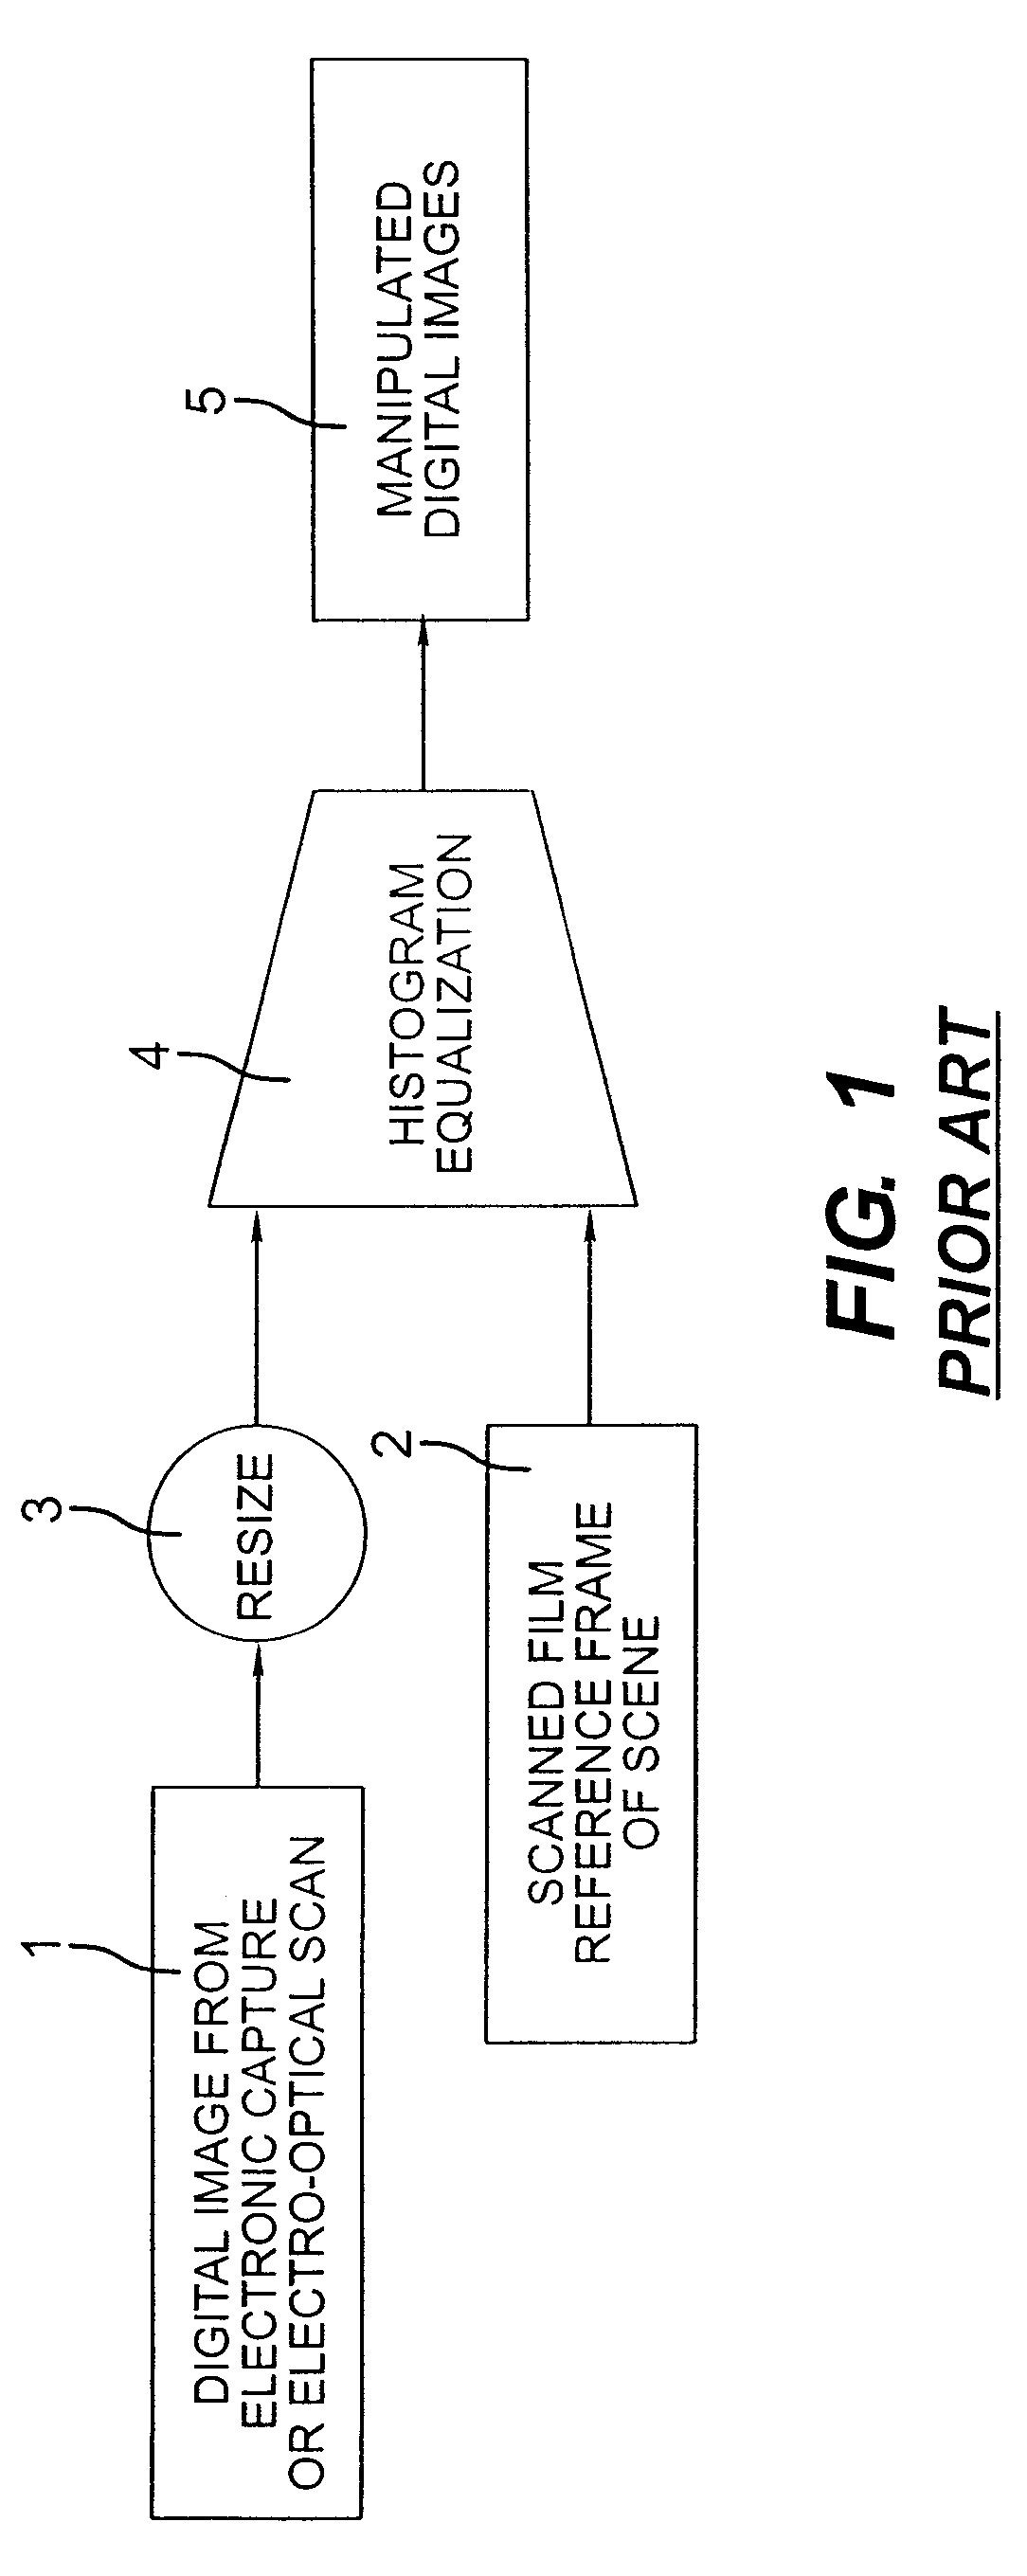 System and method for processing images to emulate film tonescale and color